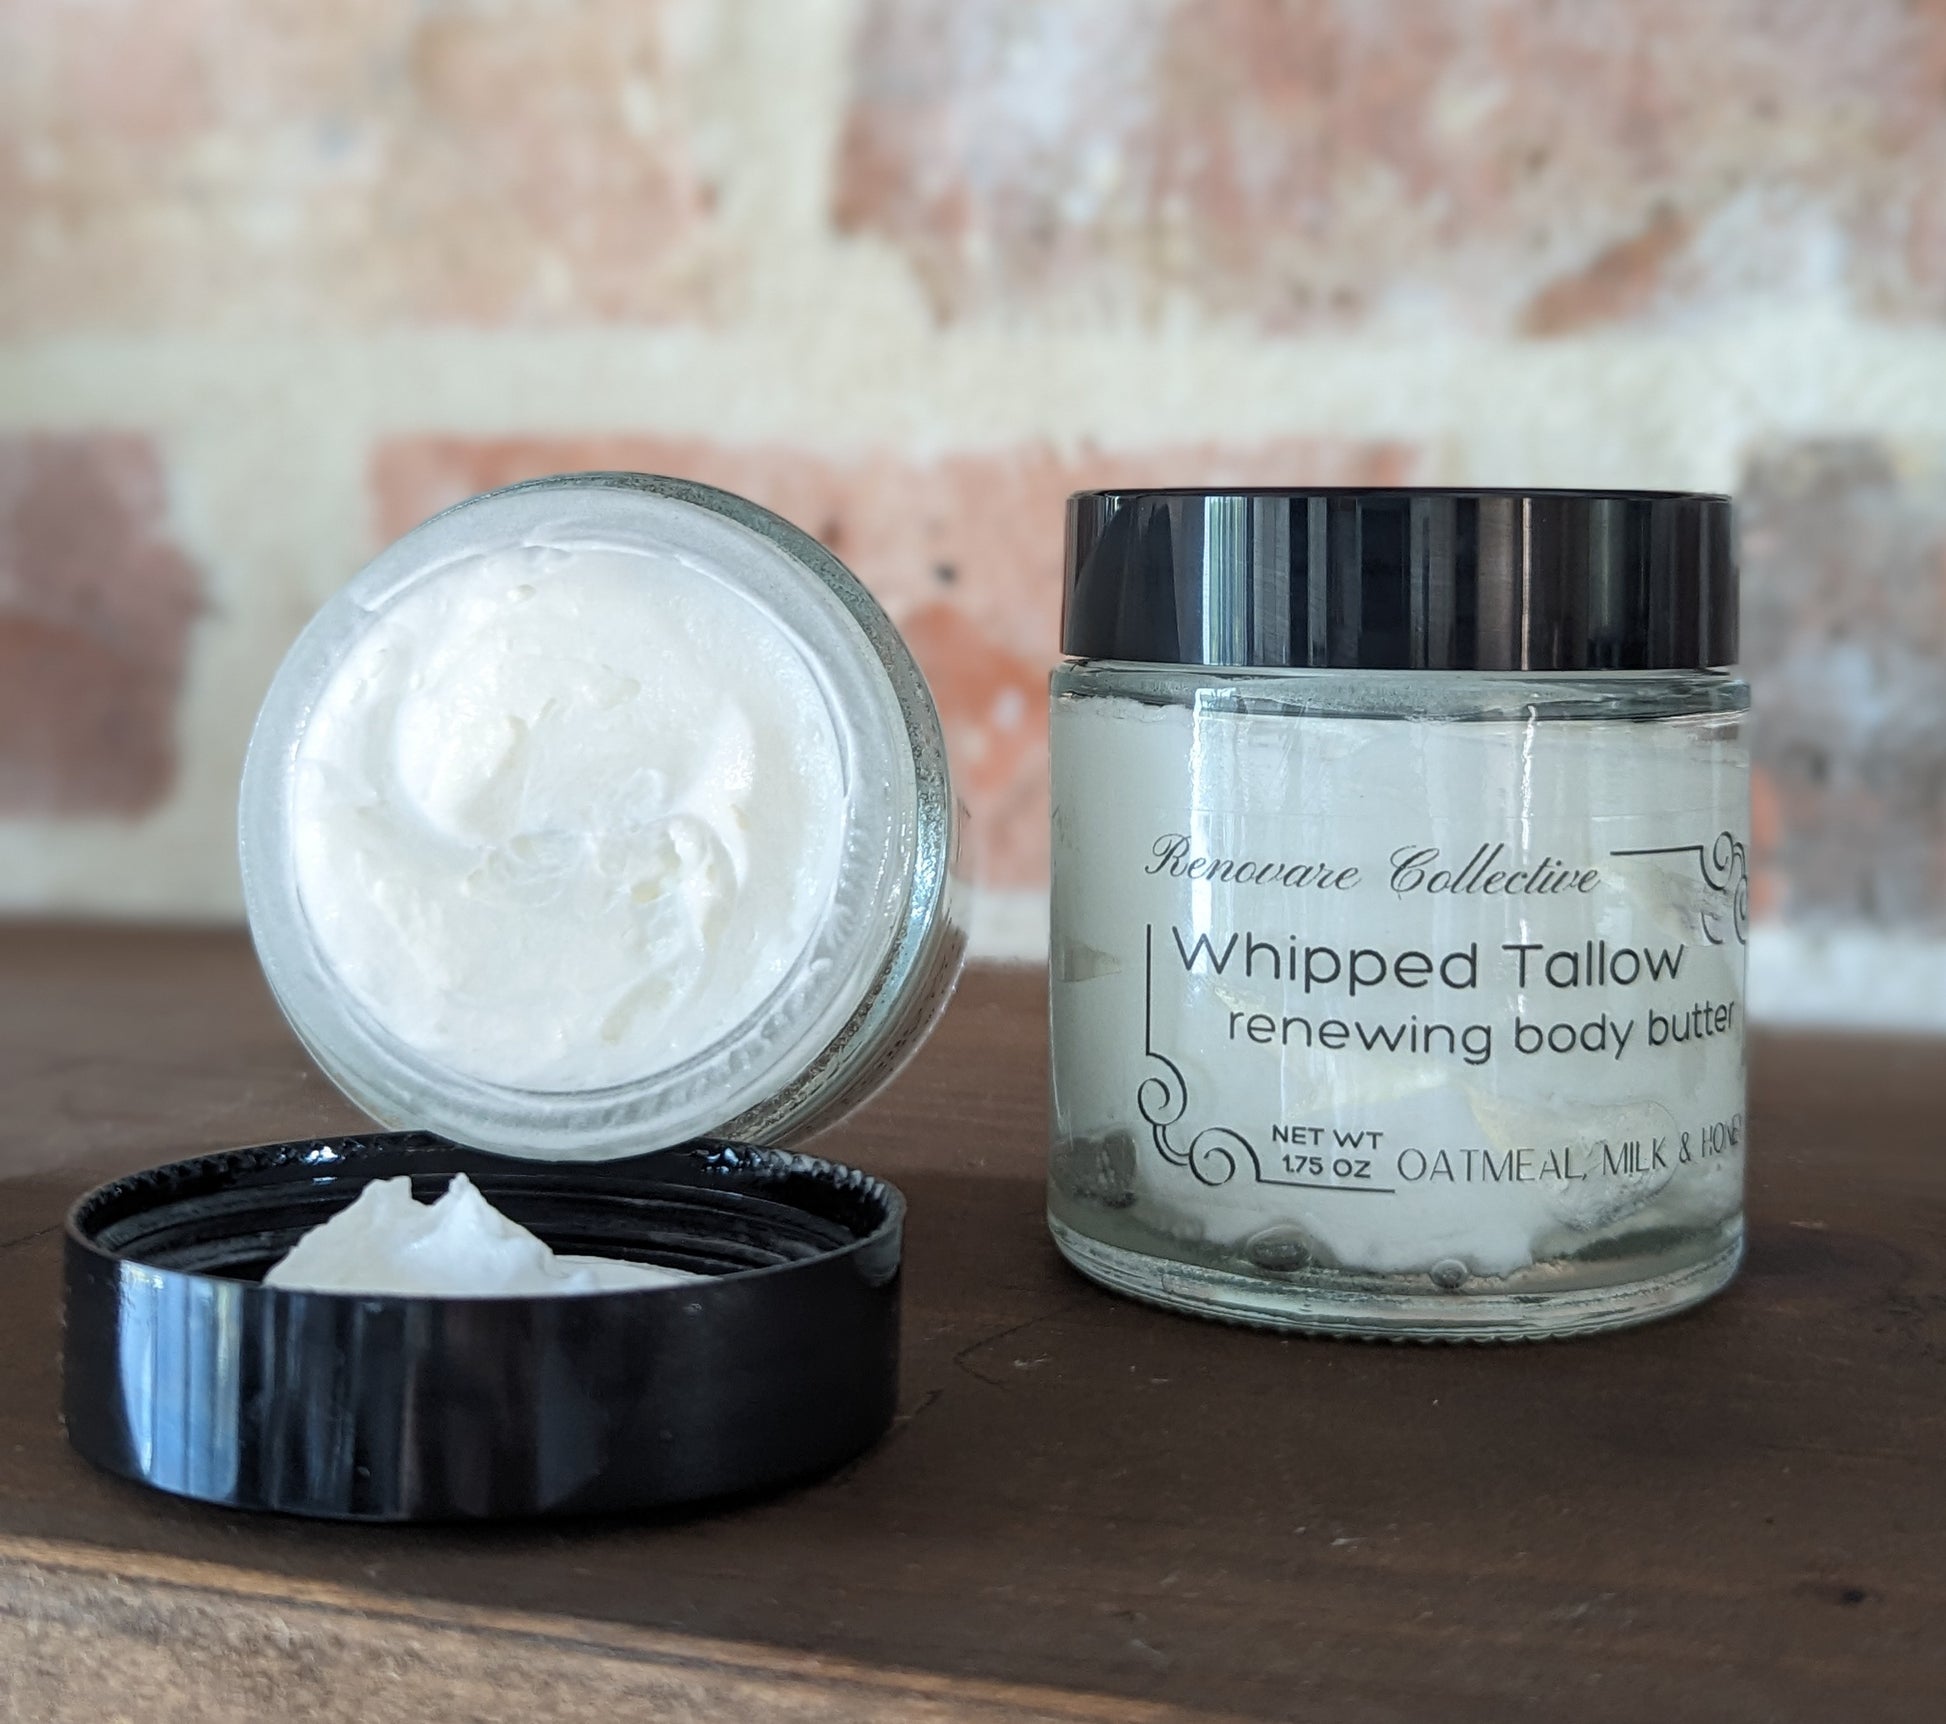 Whipped Tallow Renewing Body Butter - The Wooden Boar Soap Company